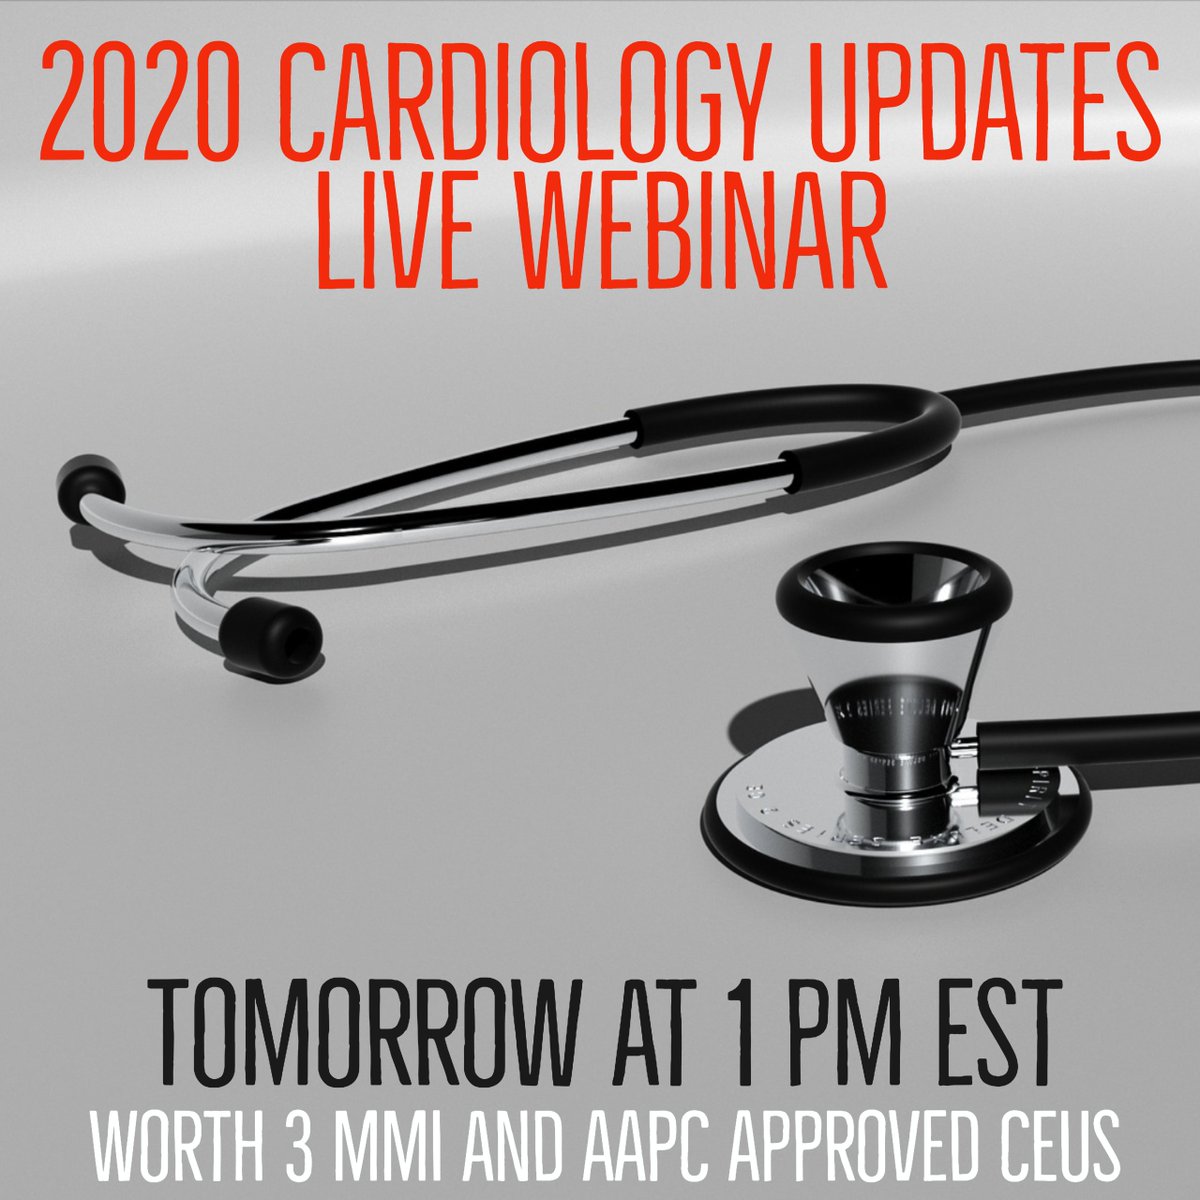 Tomorrow is the 2020 Cardiology Updates Live Webinar with Rhonda Granja at 1 pm est!

Join here: bit.ly/2020cardioweb

#cardiology #cardiocoder #ccc #cardiologycoding #cardiologycoder #webinar #aapc #ceus #mmitraining